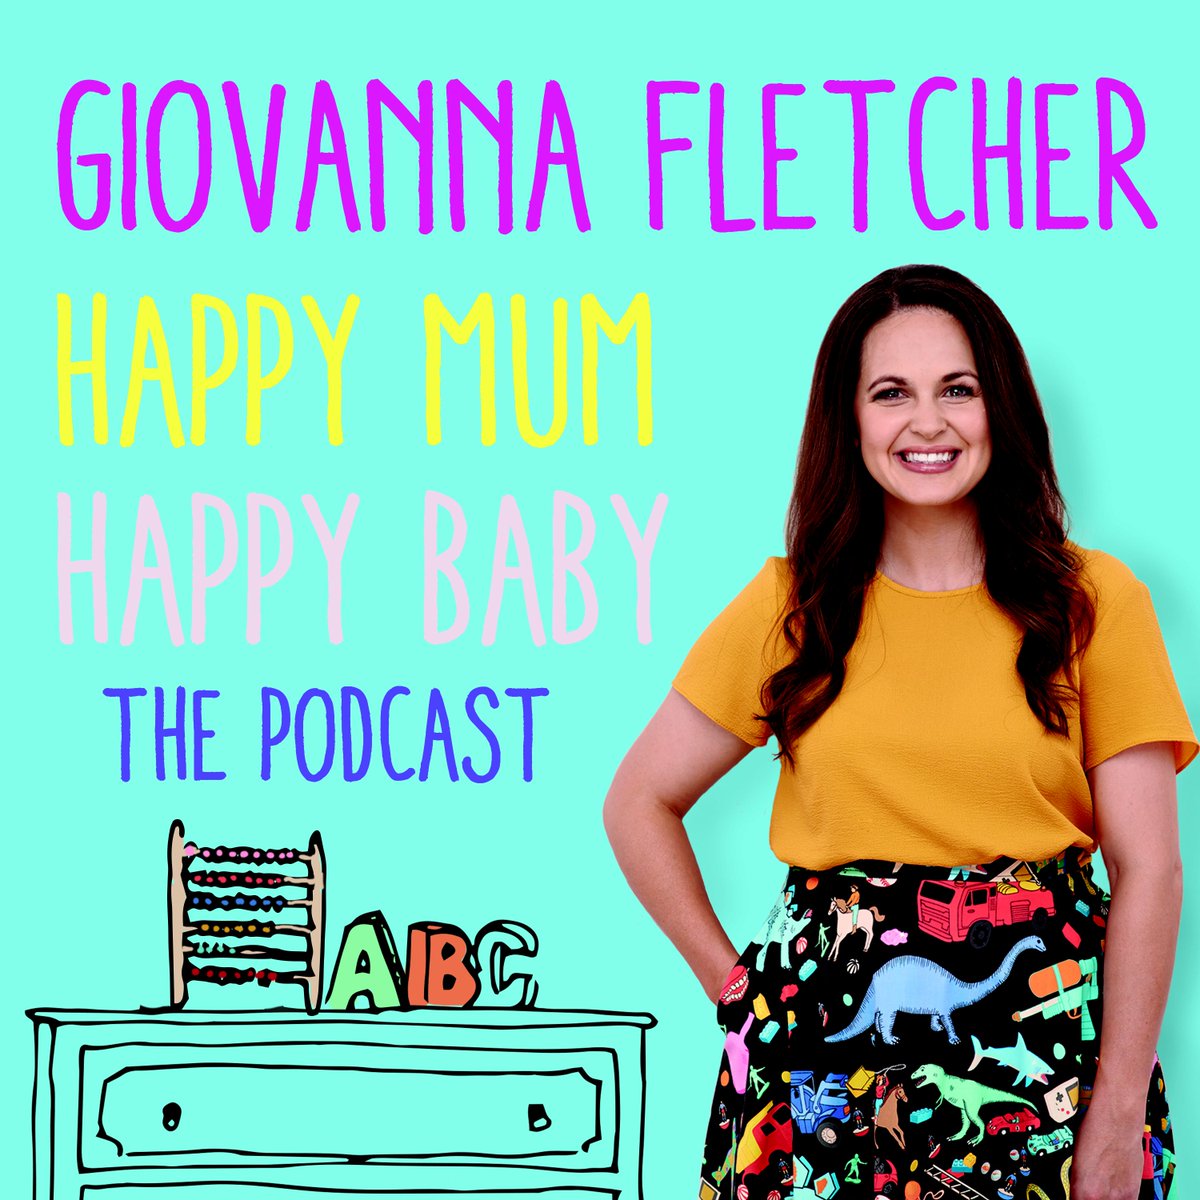 4. Relating to celebrities when it comes to parenting leaves me with a raised eyebrow, but coz  @CBeebiesHQ  @thebabyclubtv is HUGE in our house I decided to give Happy Mum Happy Baby w  @MrsGiFletcher a whirl. It's actually great.